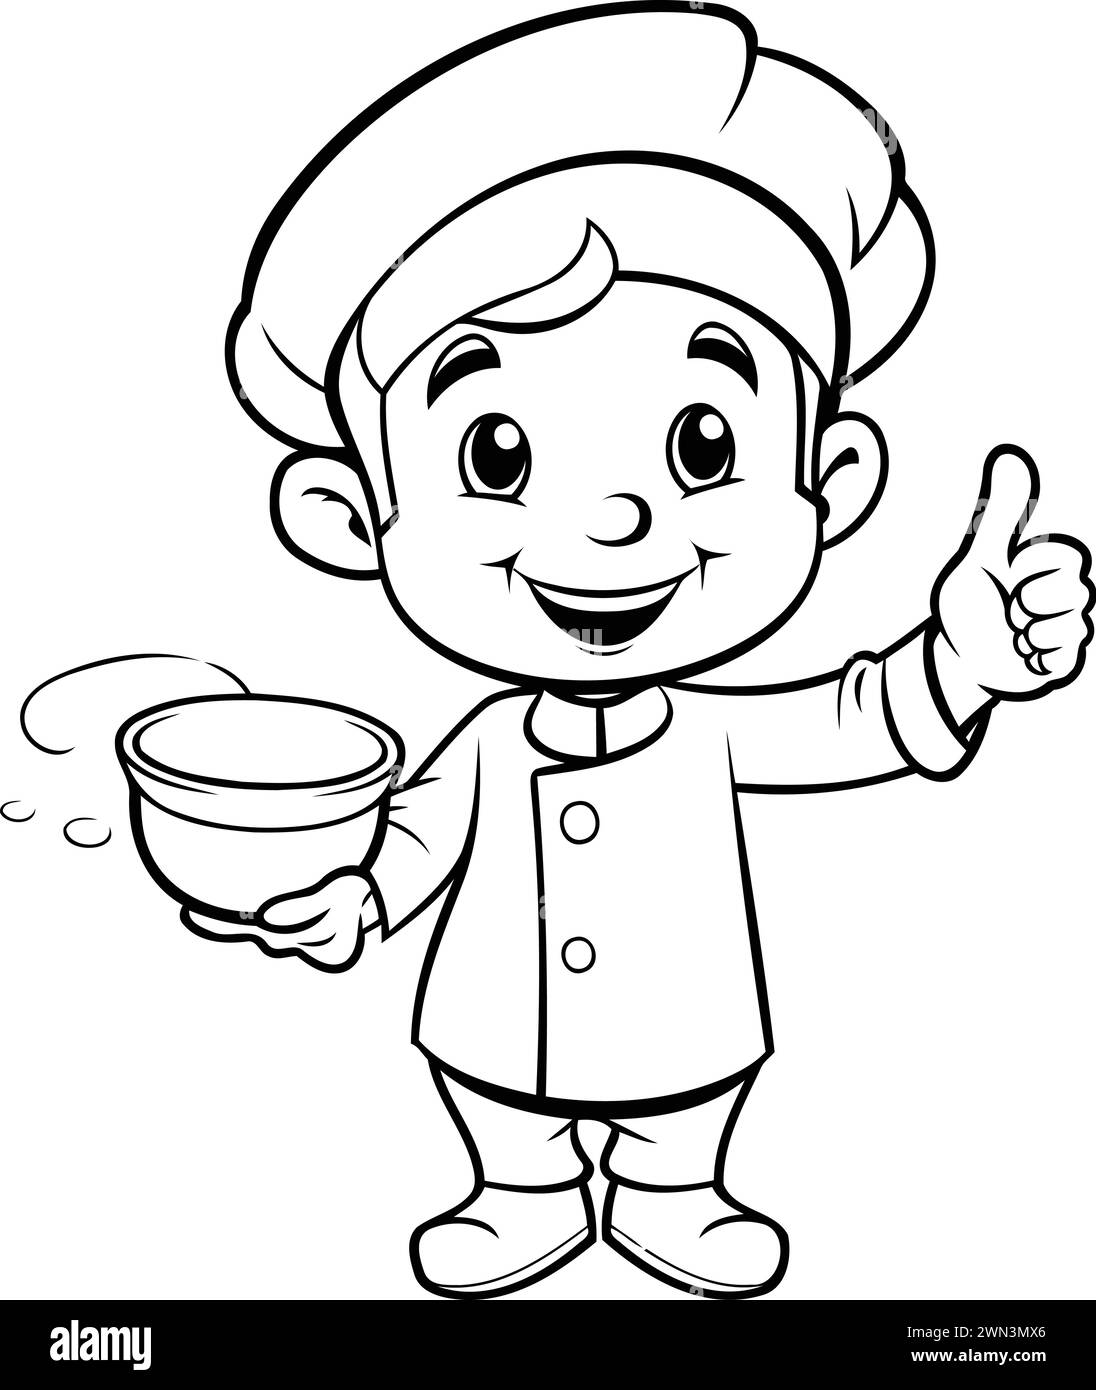 Black and White Cartoon Illustration of Cute Little Chef Boy Character for Coloring Book Stock Vector